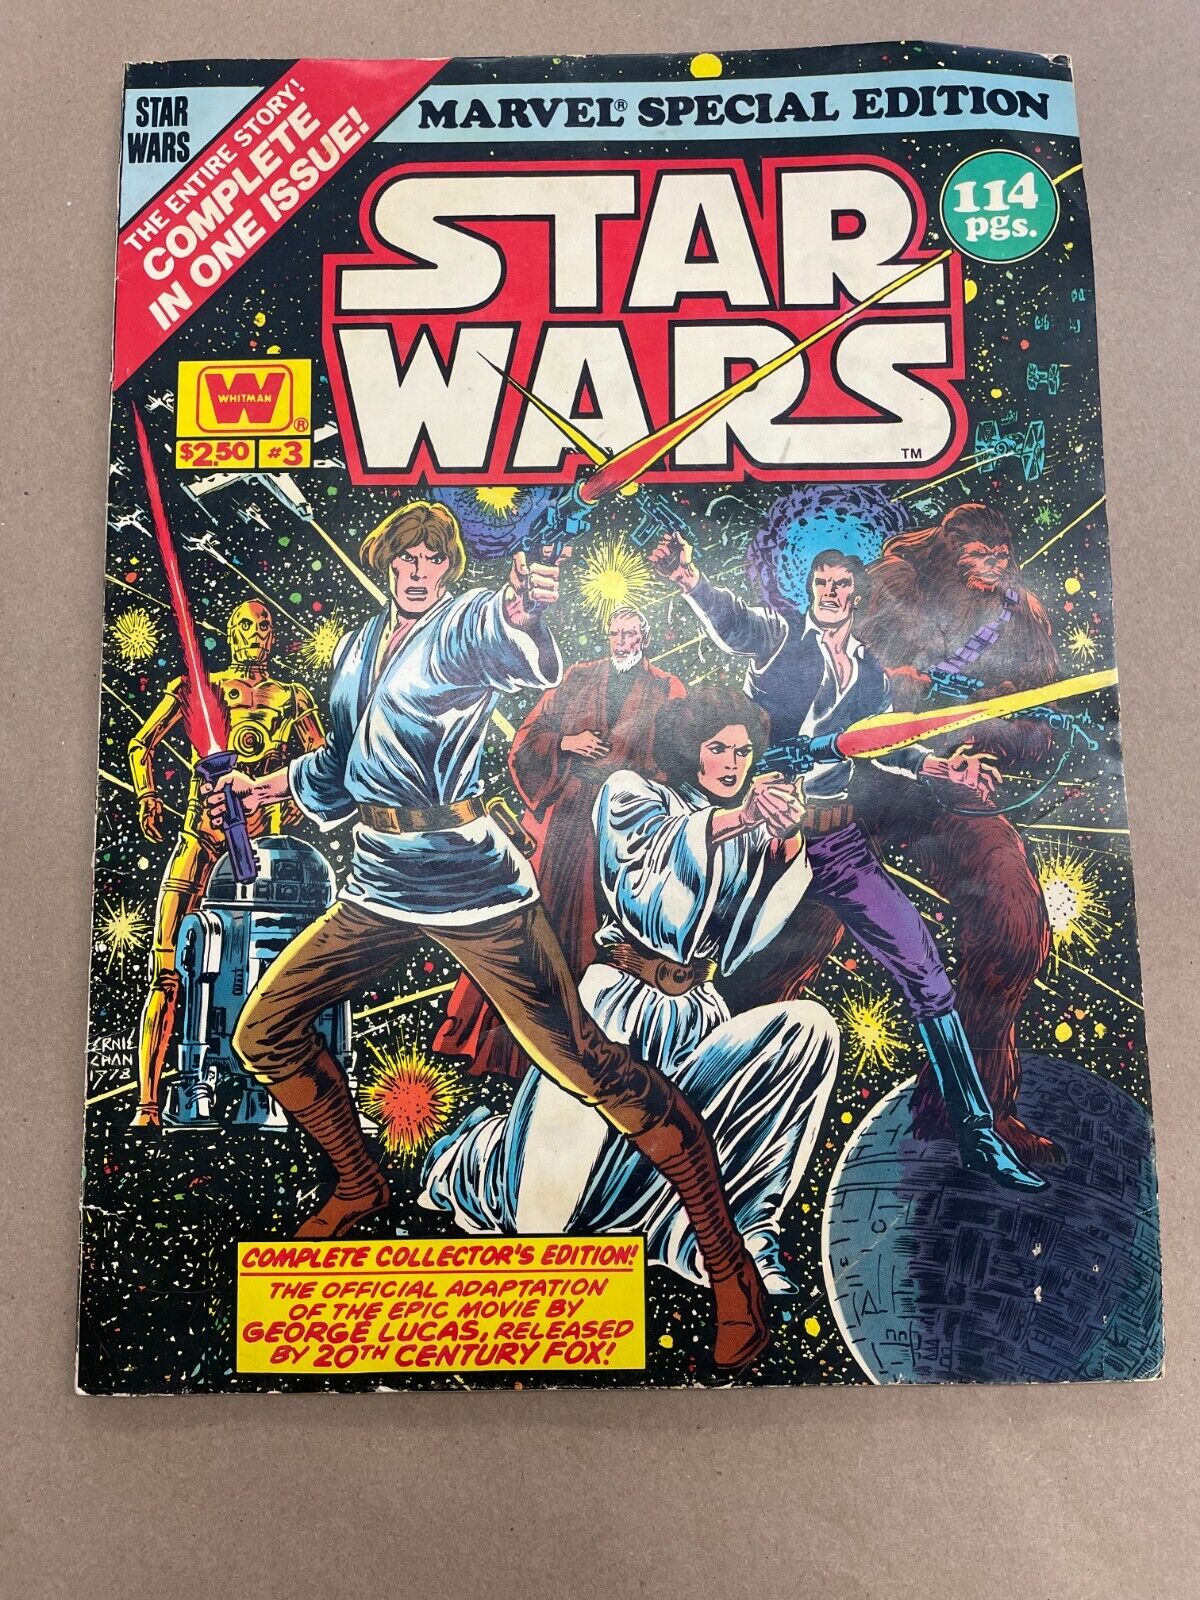 Vintage Star Wars #1 (1977) - Marvel Special Edition Comic - *Great Condition*